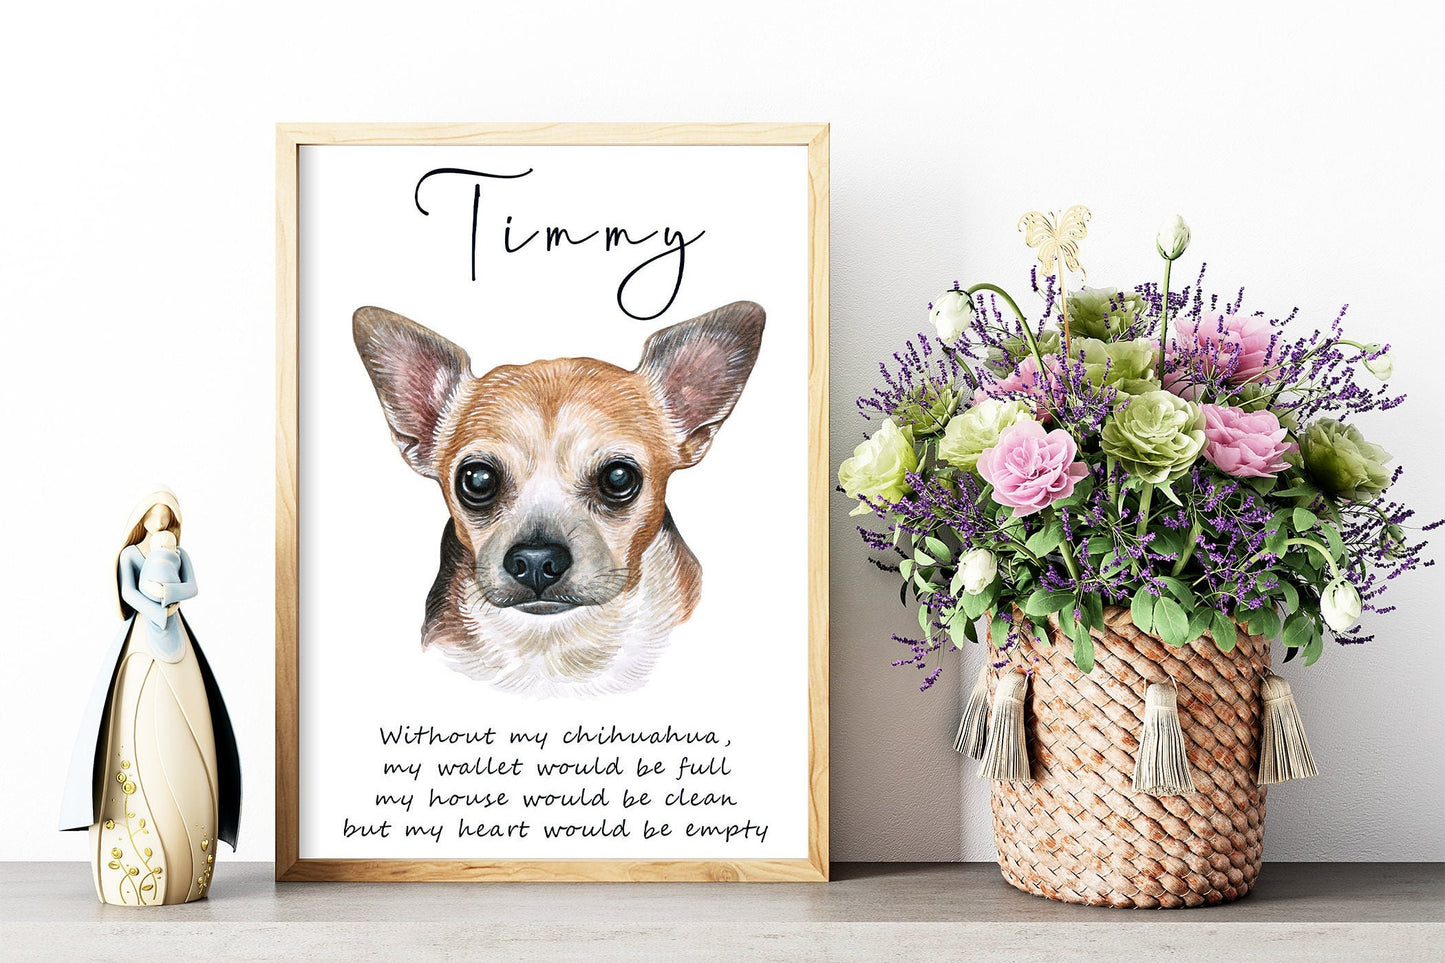 Chihuahua artwork - charming portraits of smallest dog with custom funny or heart warming message | A4 | A5 | Greeting card